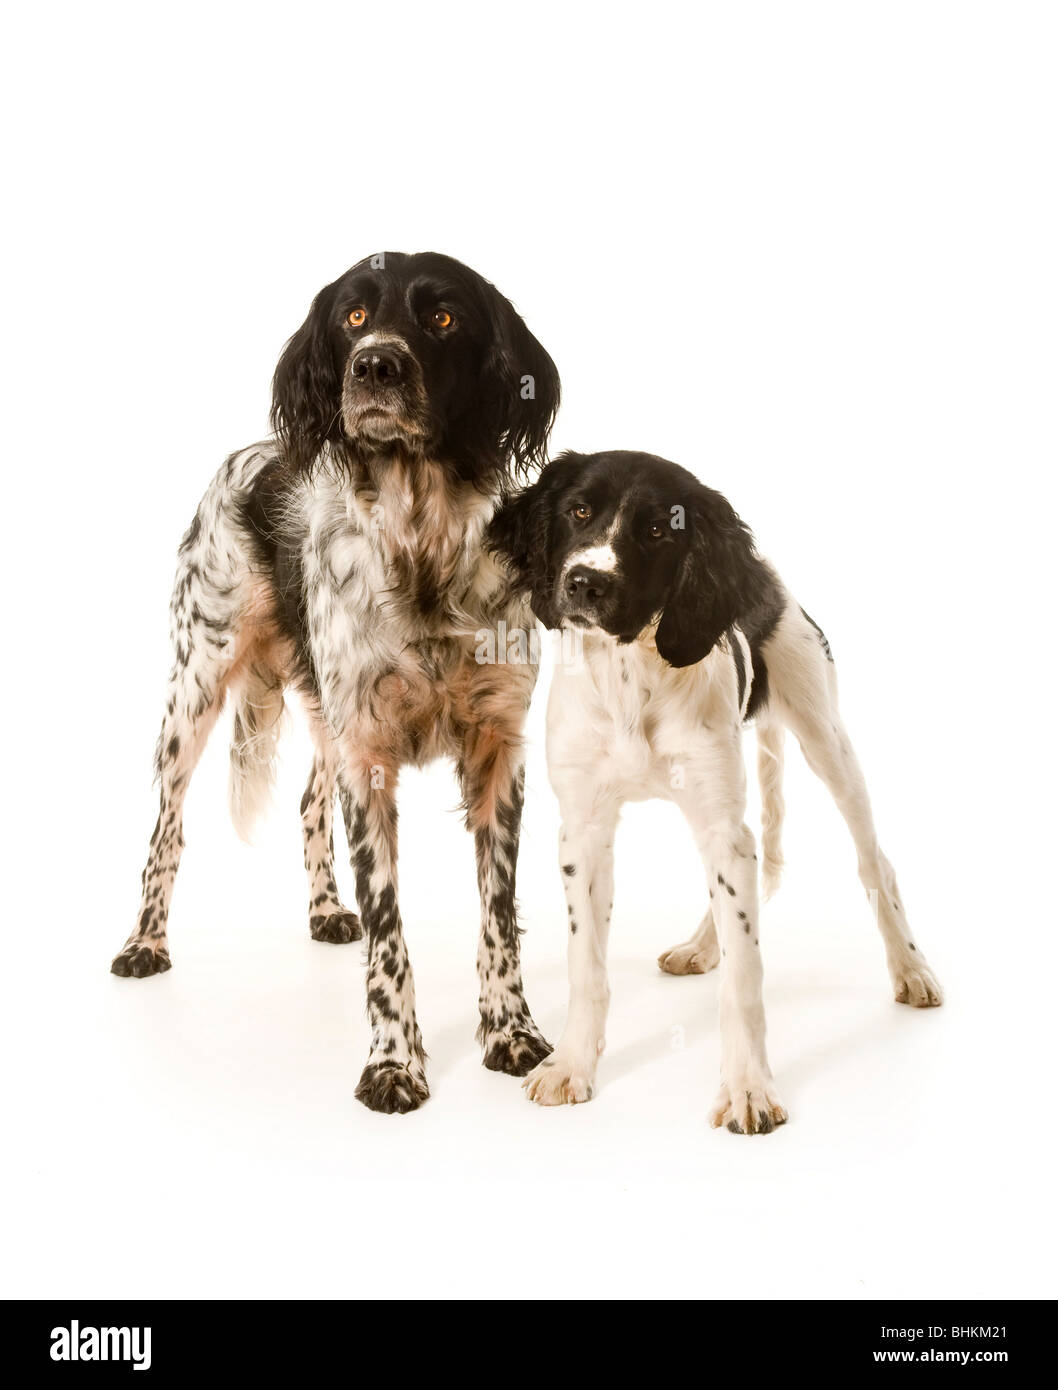 An adult and puppy Large Munsterlander dogs standing together, facing the camera on a white background. Stock Photo